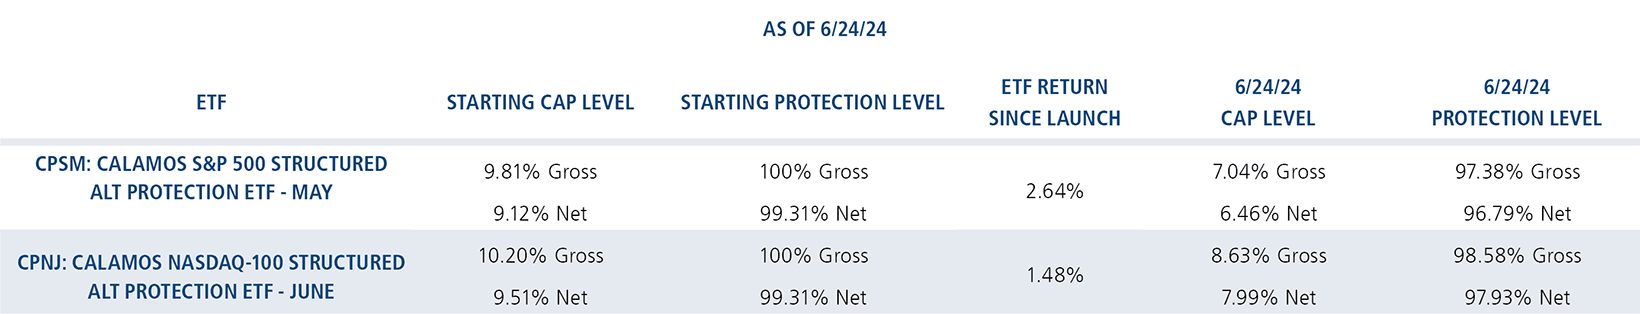 CPSM and CPNJ starting cap, starting protection level, ETF return since launch, 6/24/24 cap level and protection level